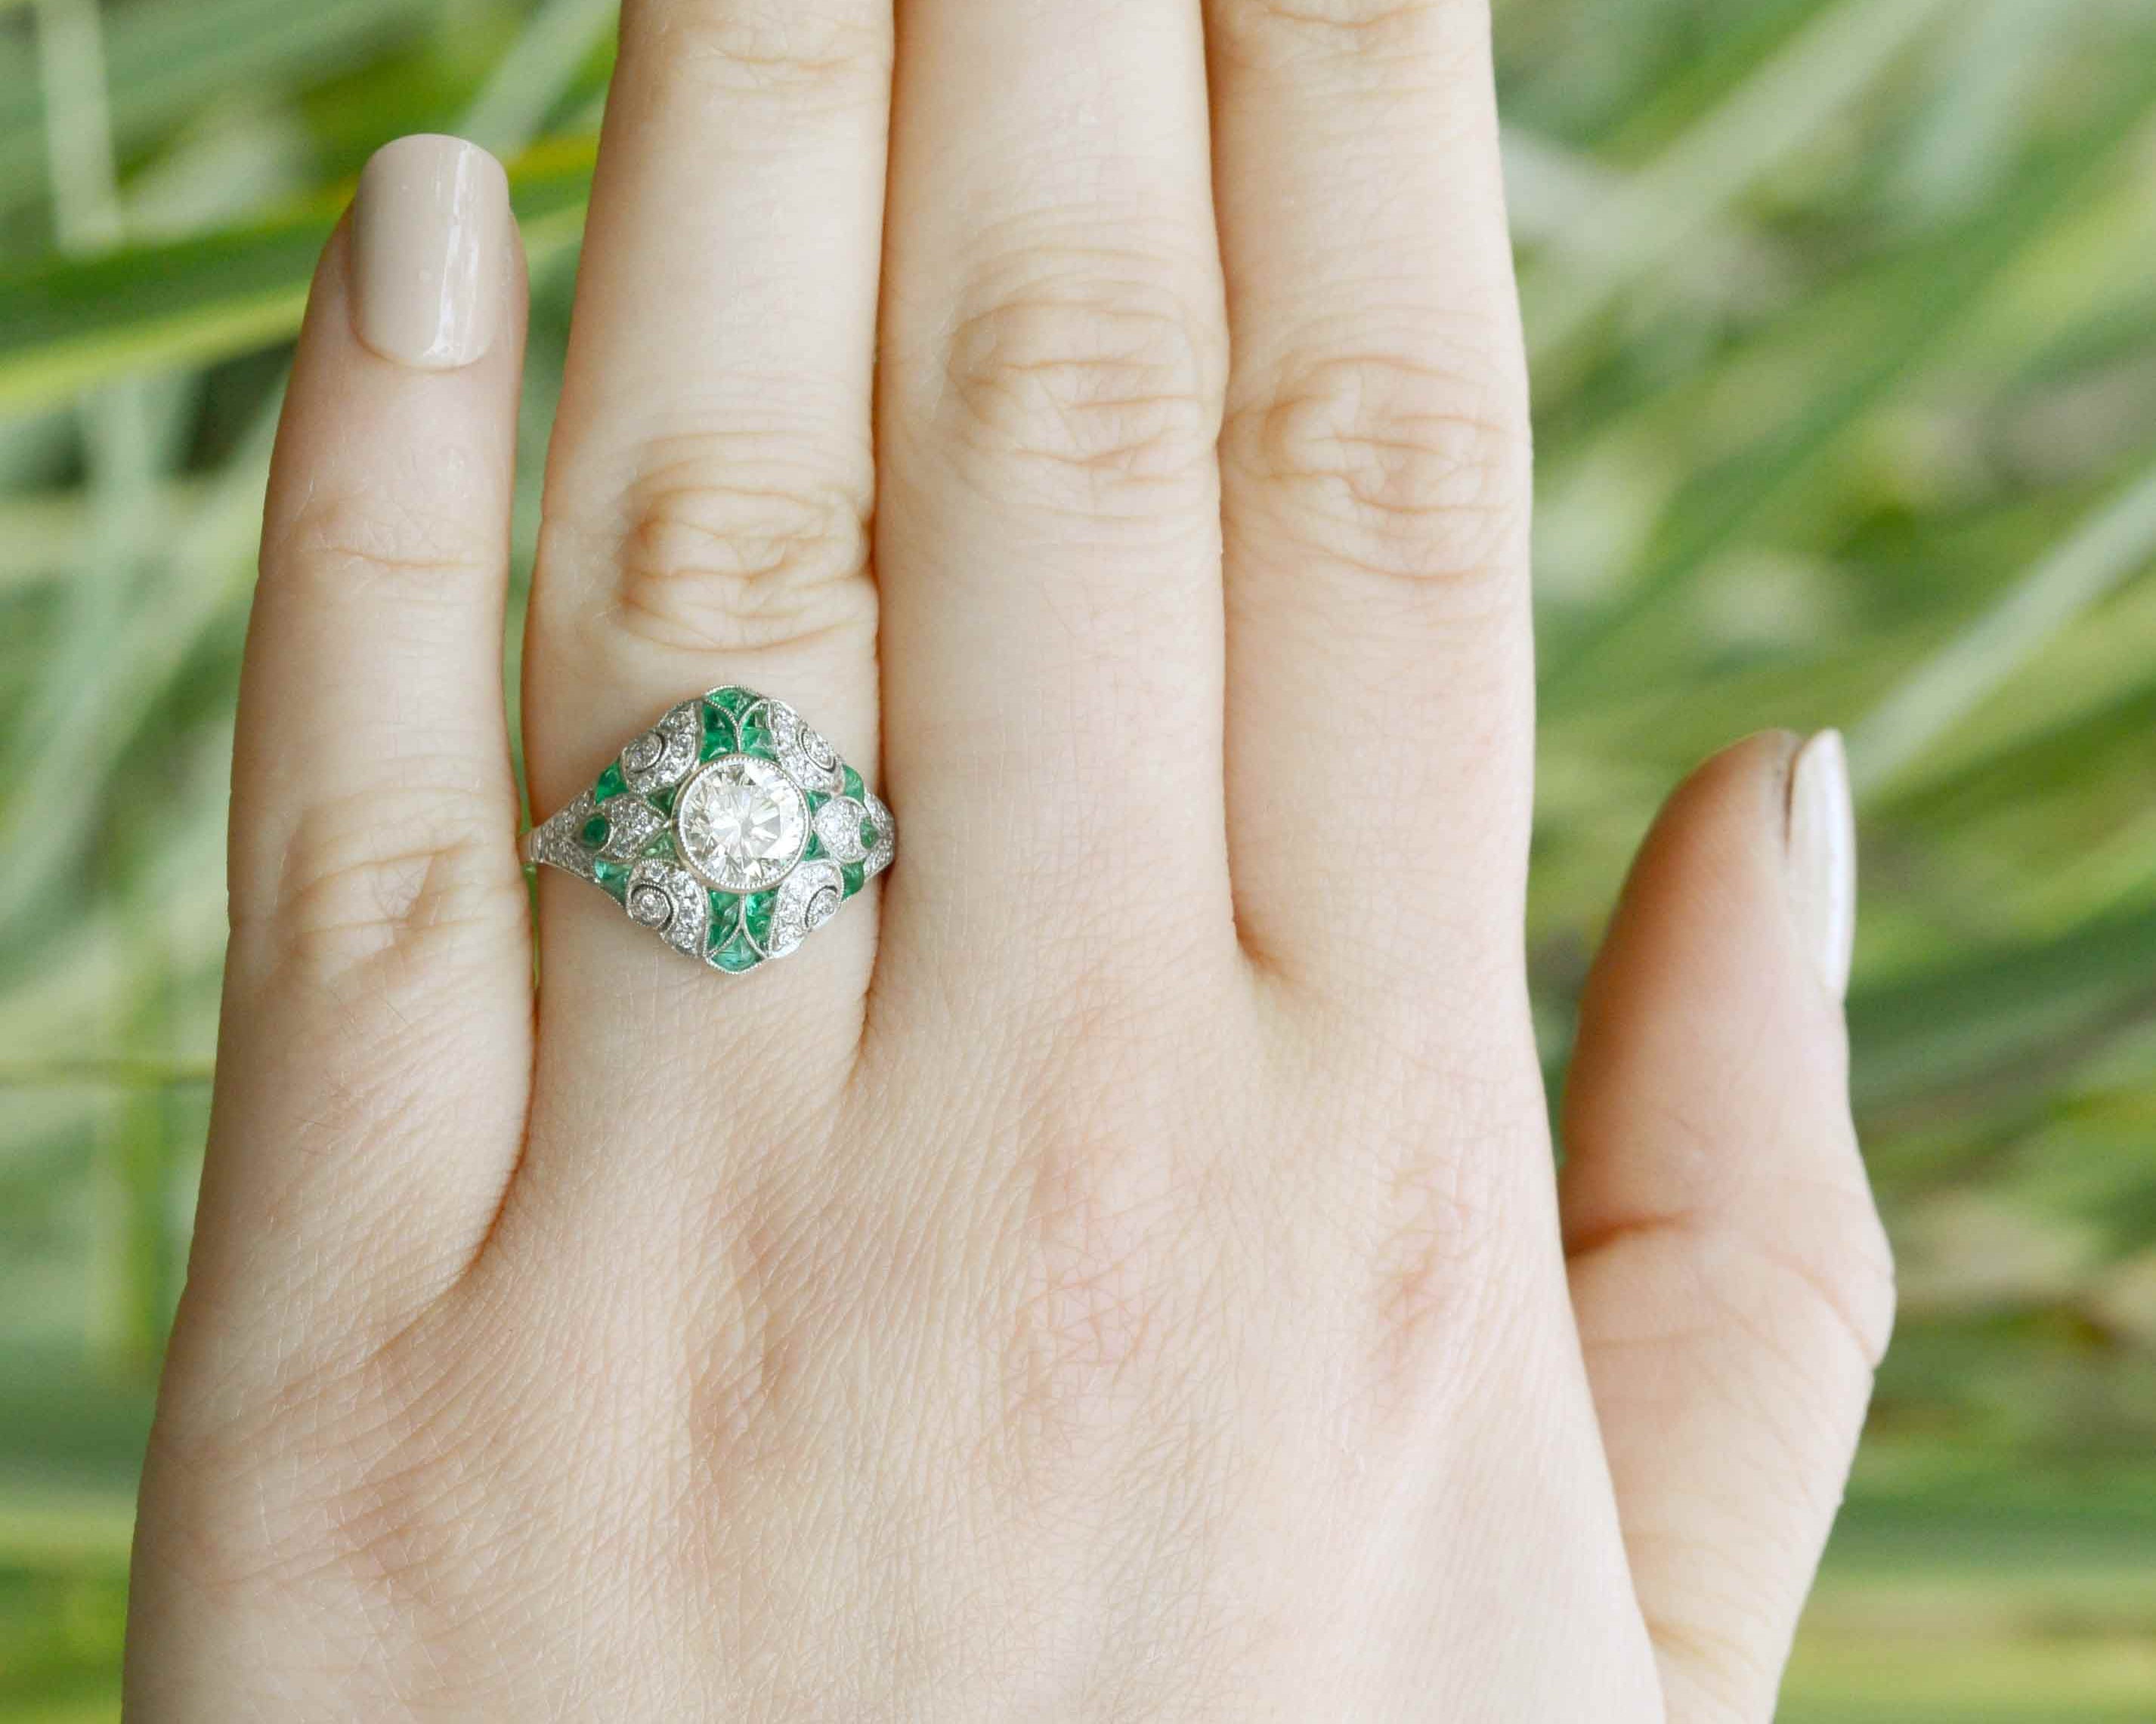 An N color with Vs2 clarity diamond is set in this stunning emerald ring.